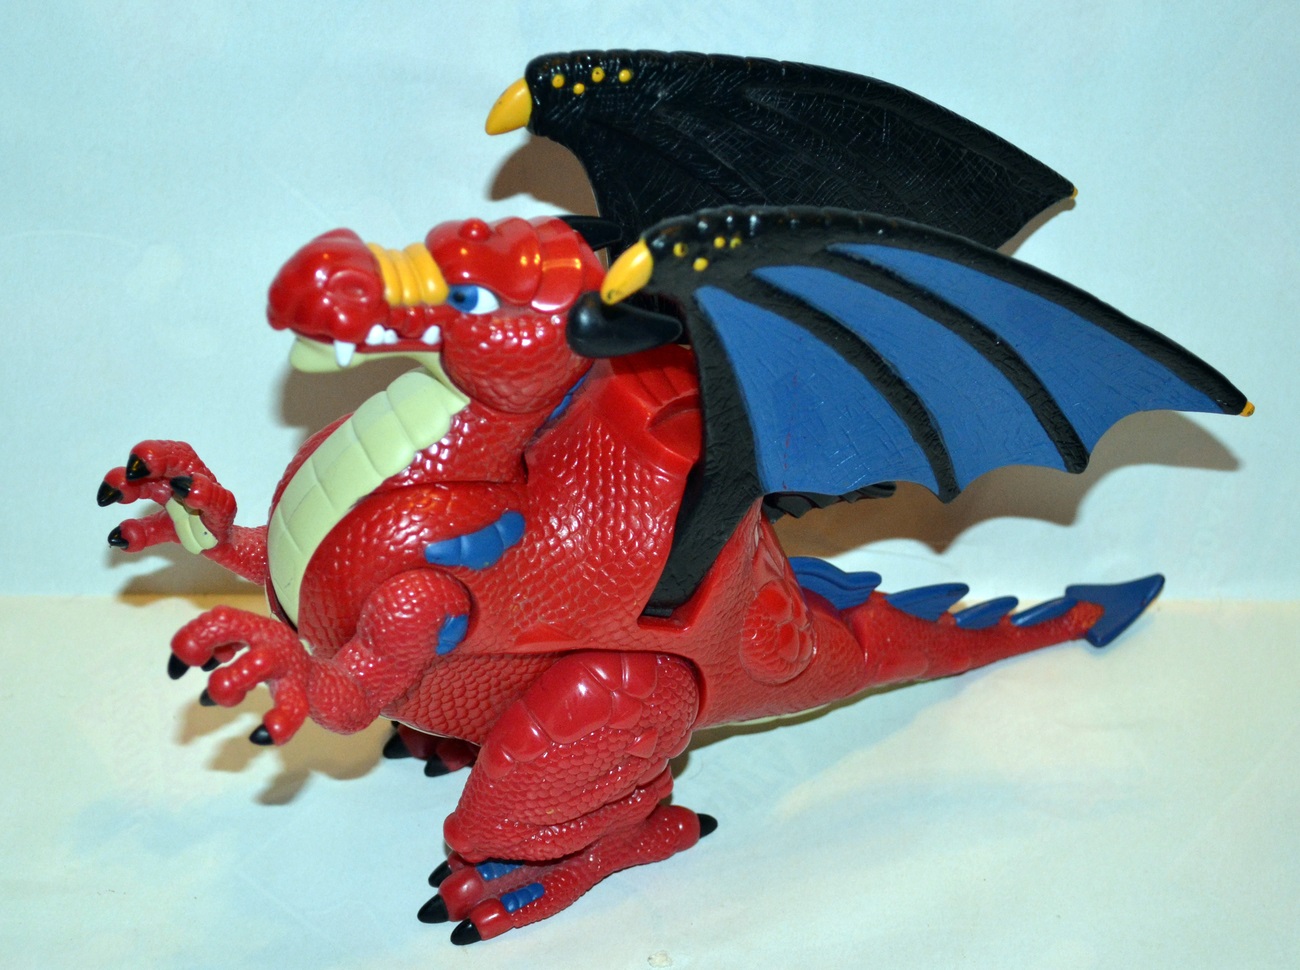 fisher price red dragon